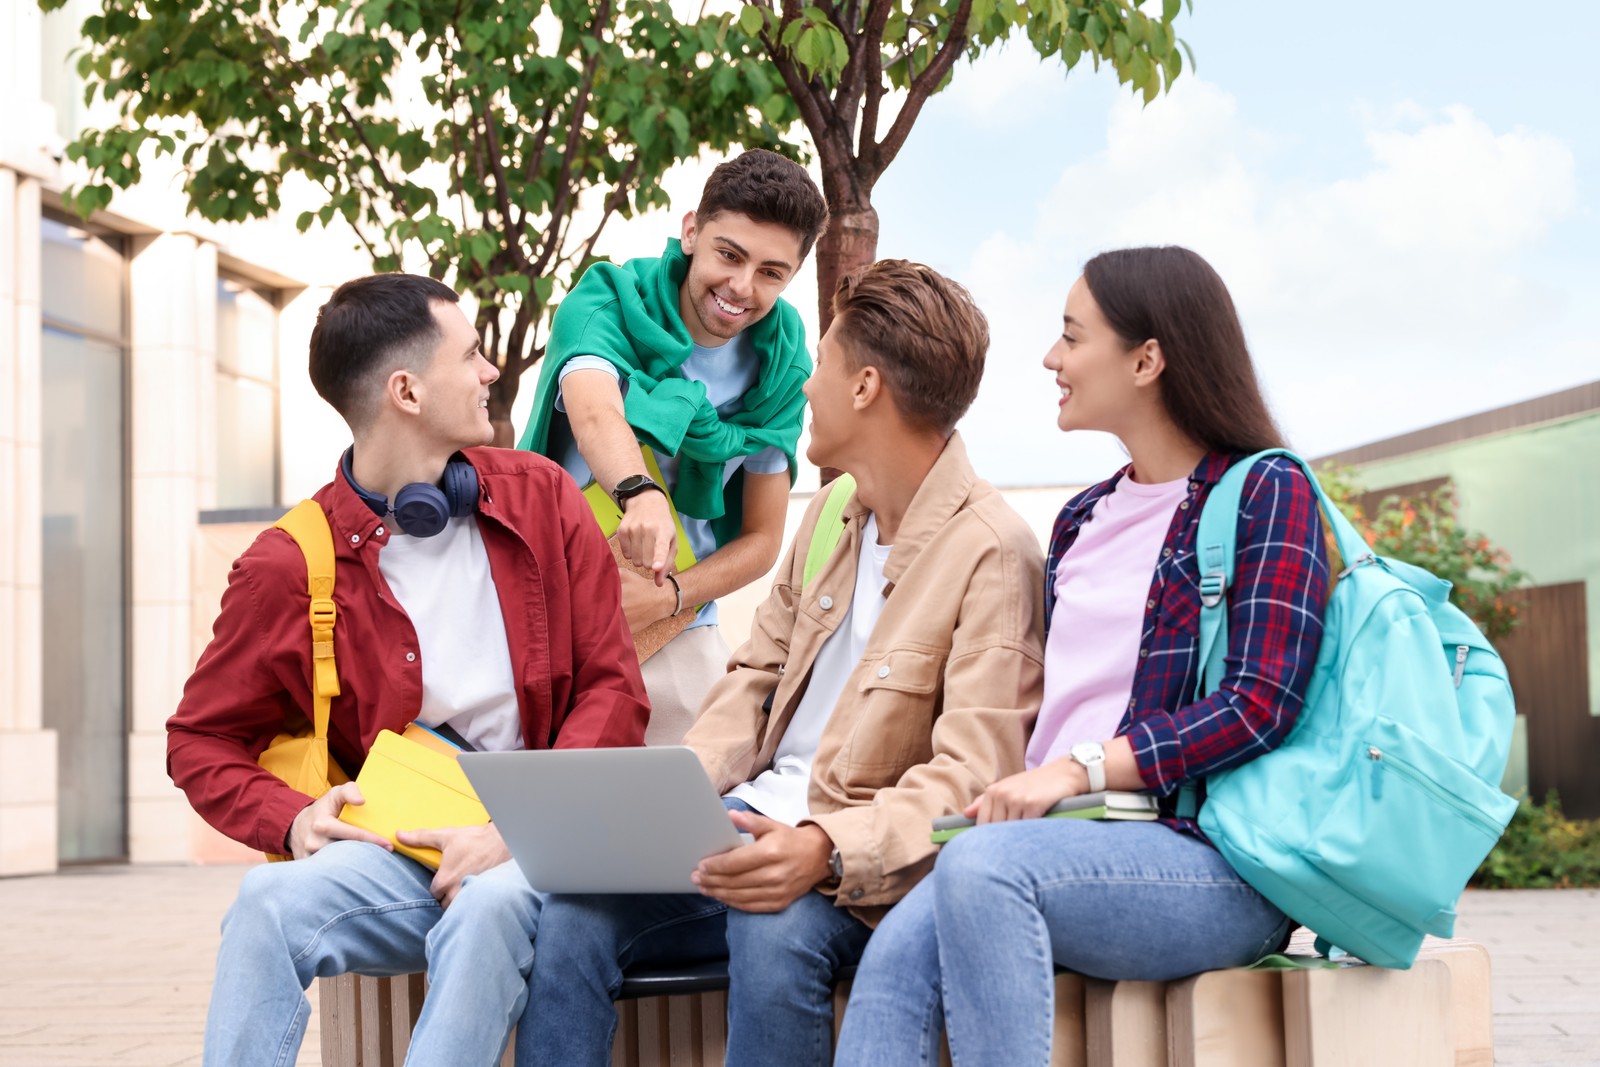 Photo of group of happy young students with laptop learning together outdoors